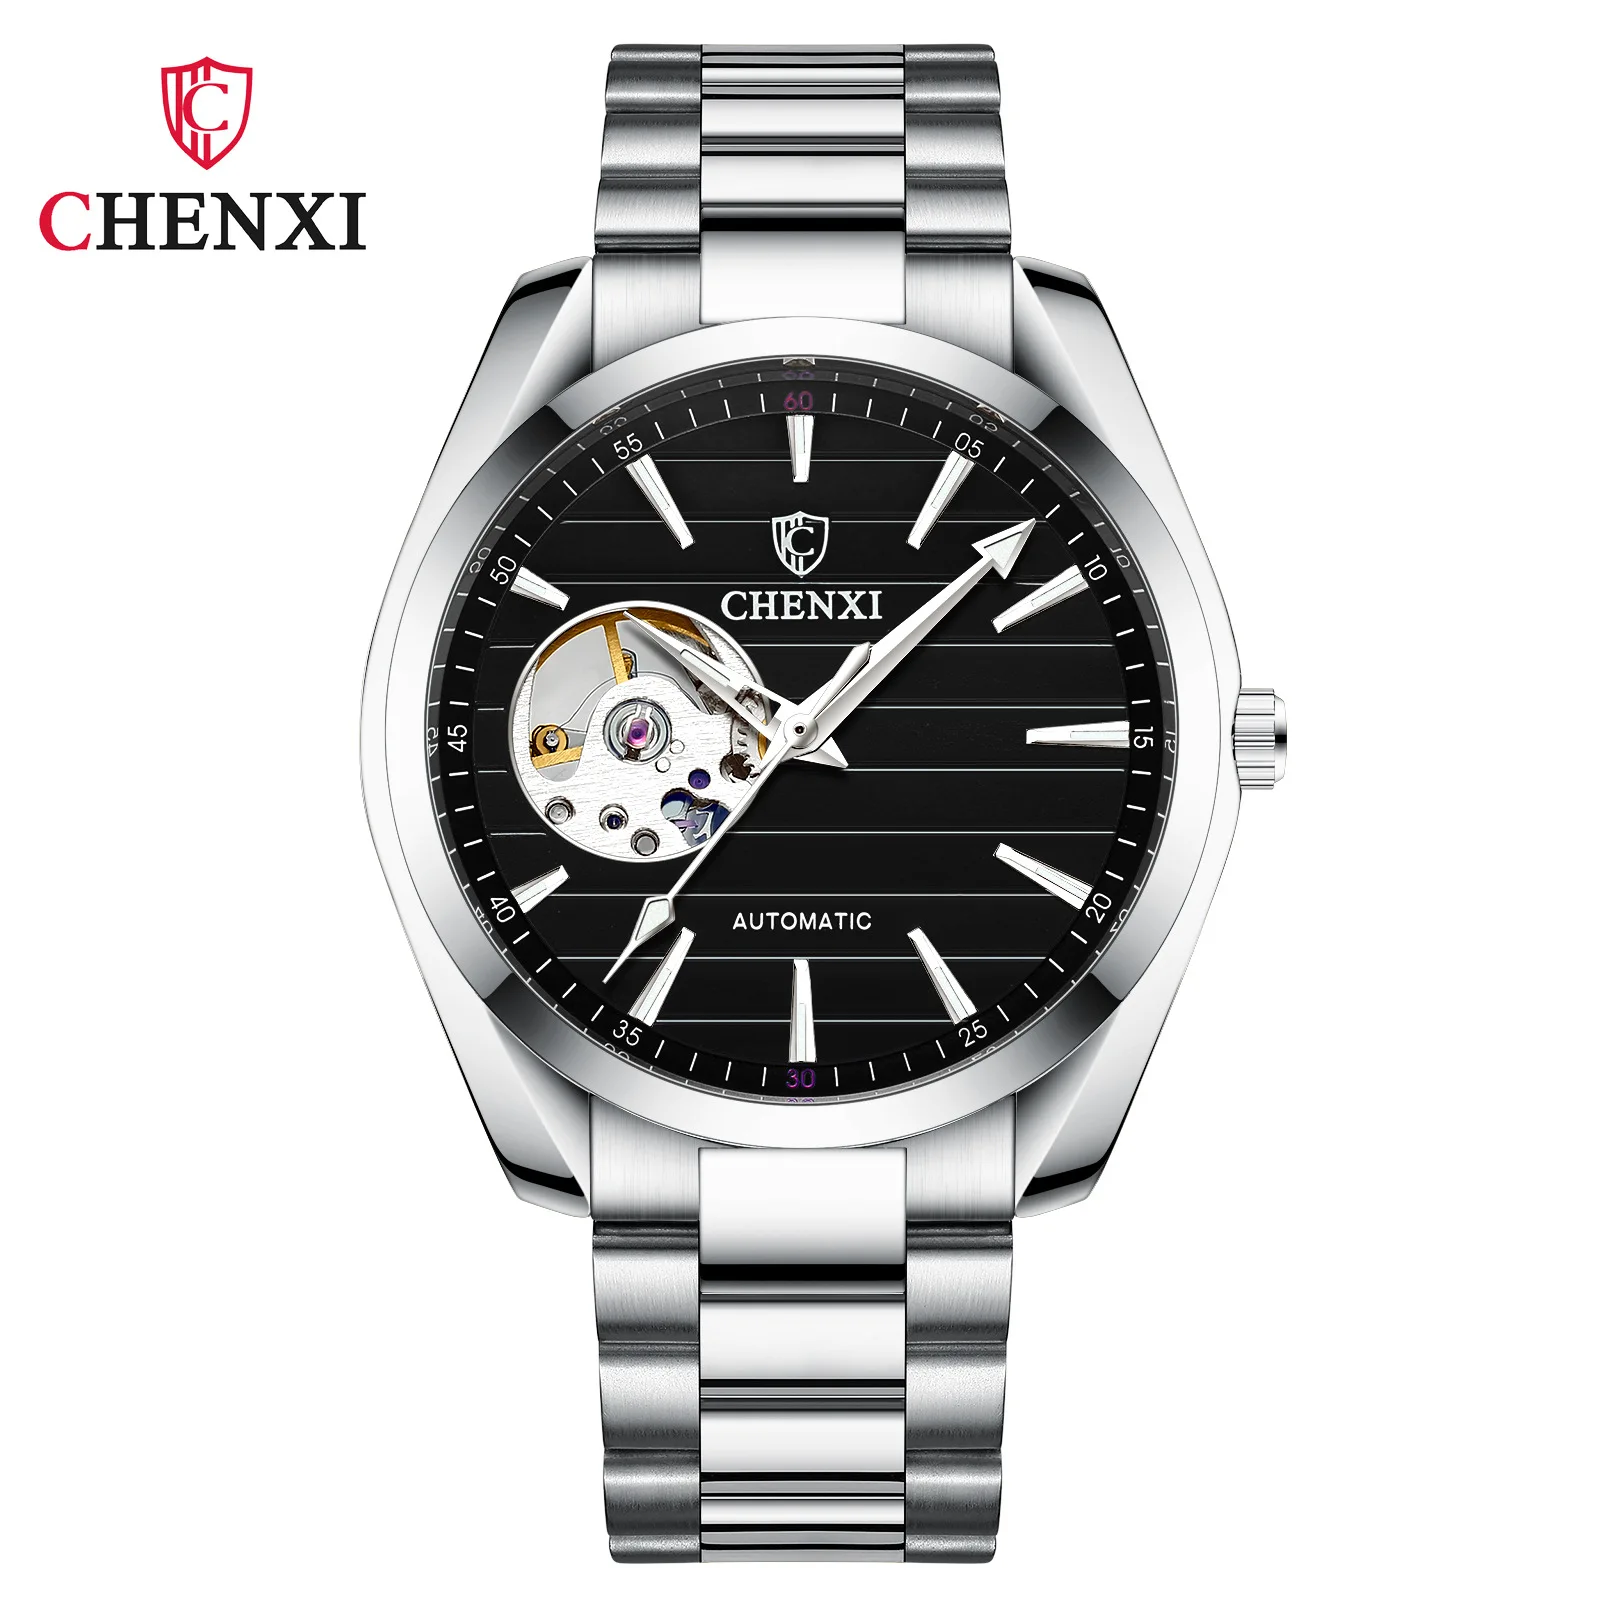 CHENXI Top Brand Watch Men Luxury Gold Stainless Steel Watches Sapphire Glass Automatic Mechanical Wristwatches 30M WaterproofTop Luxury Brand CHENXI 8806 New Men Automatic Mechanical Sapphire Glass Watch Stainless Steel Waterproof Mens Wristwatches 